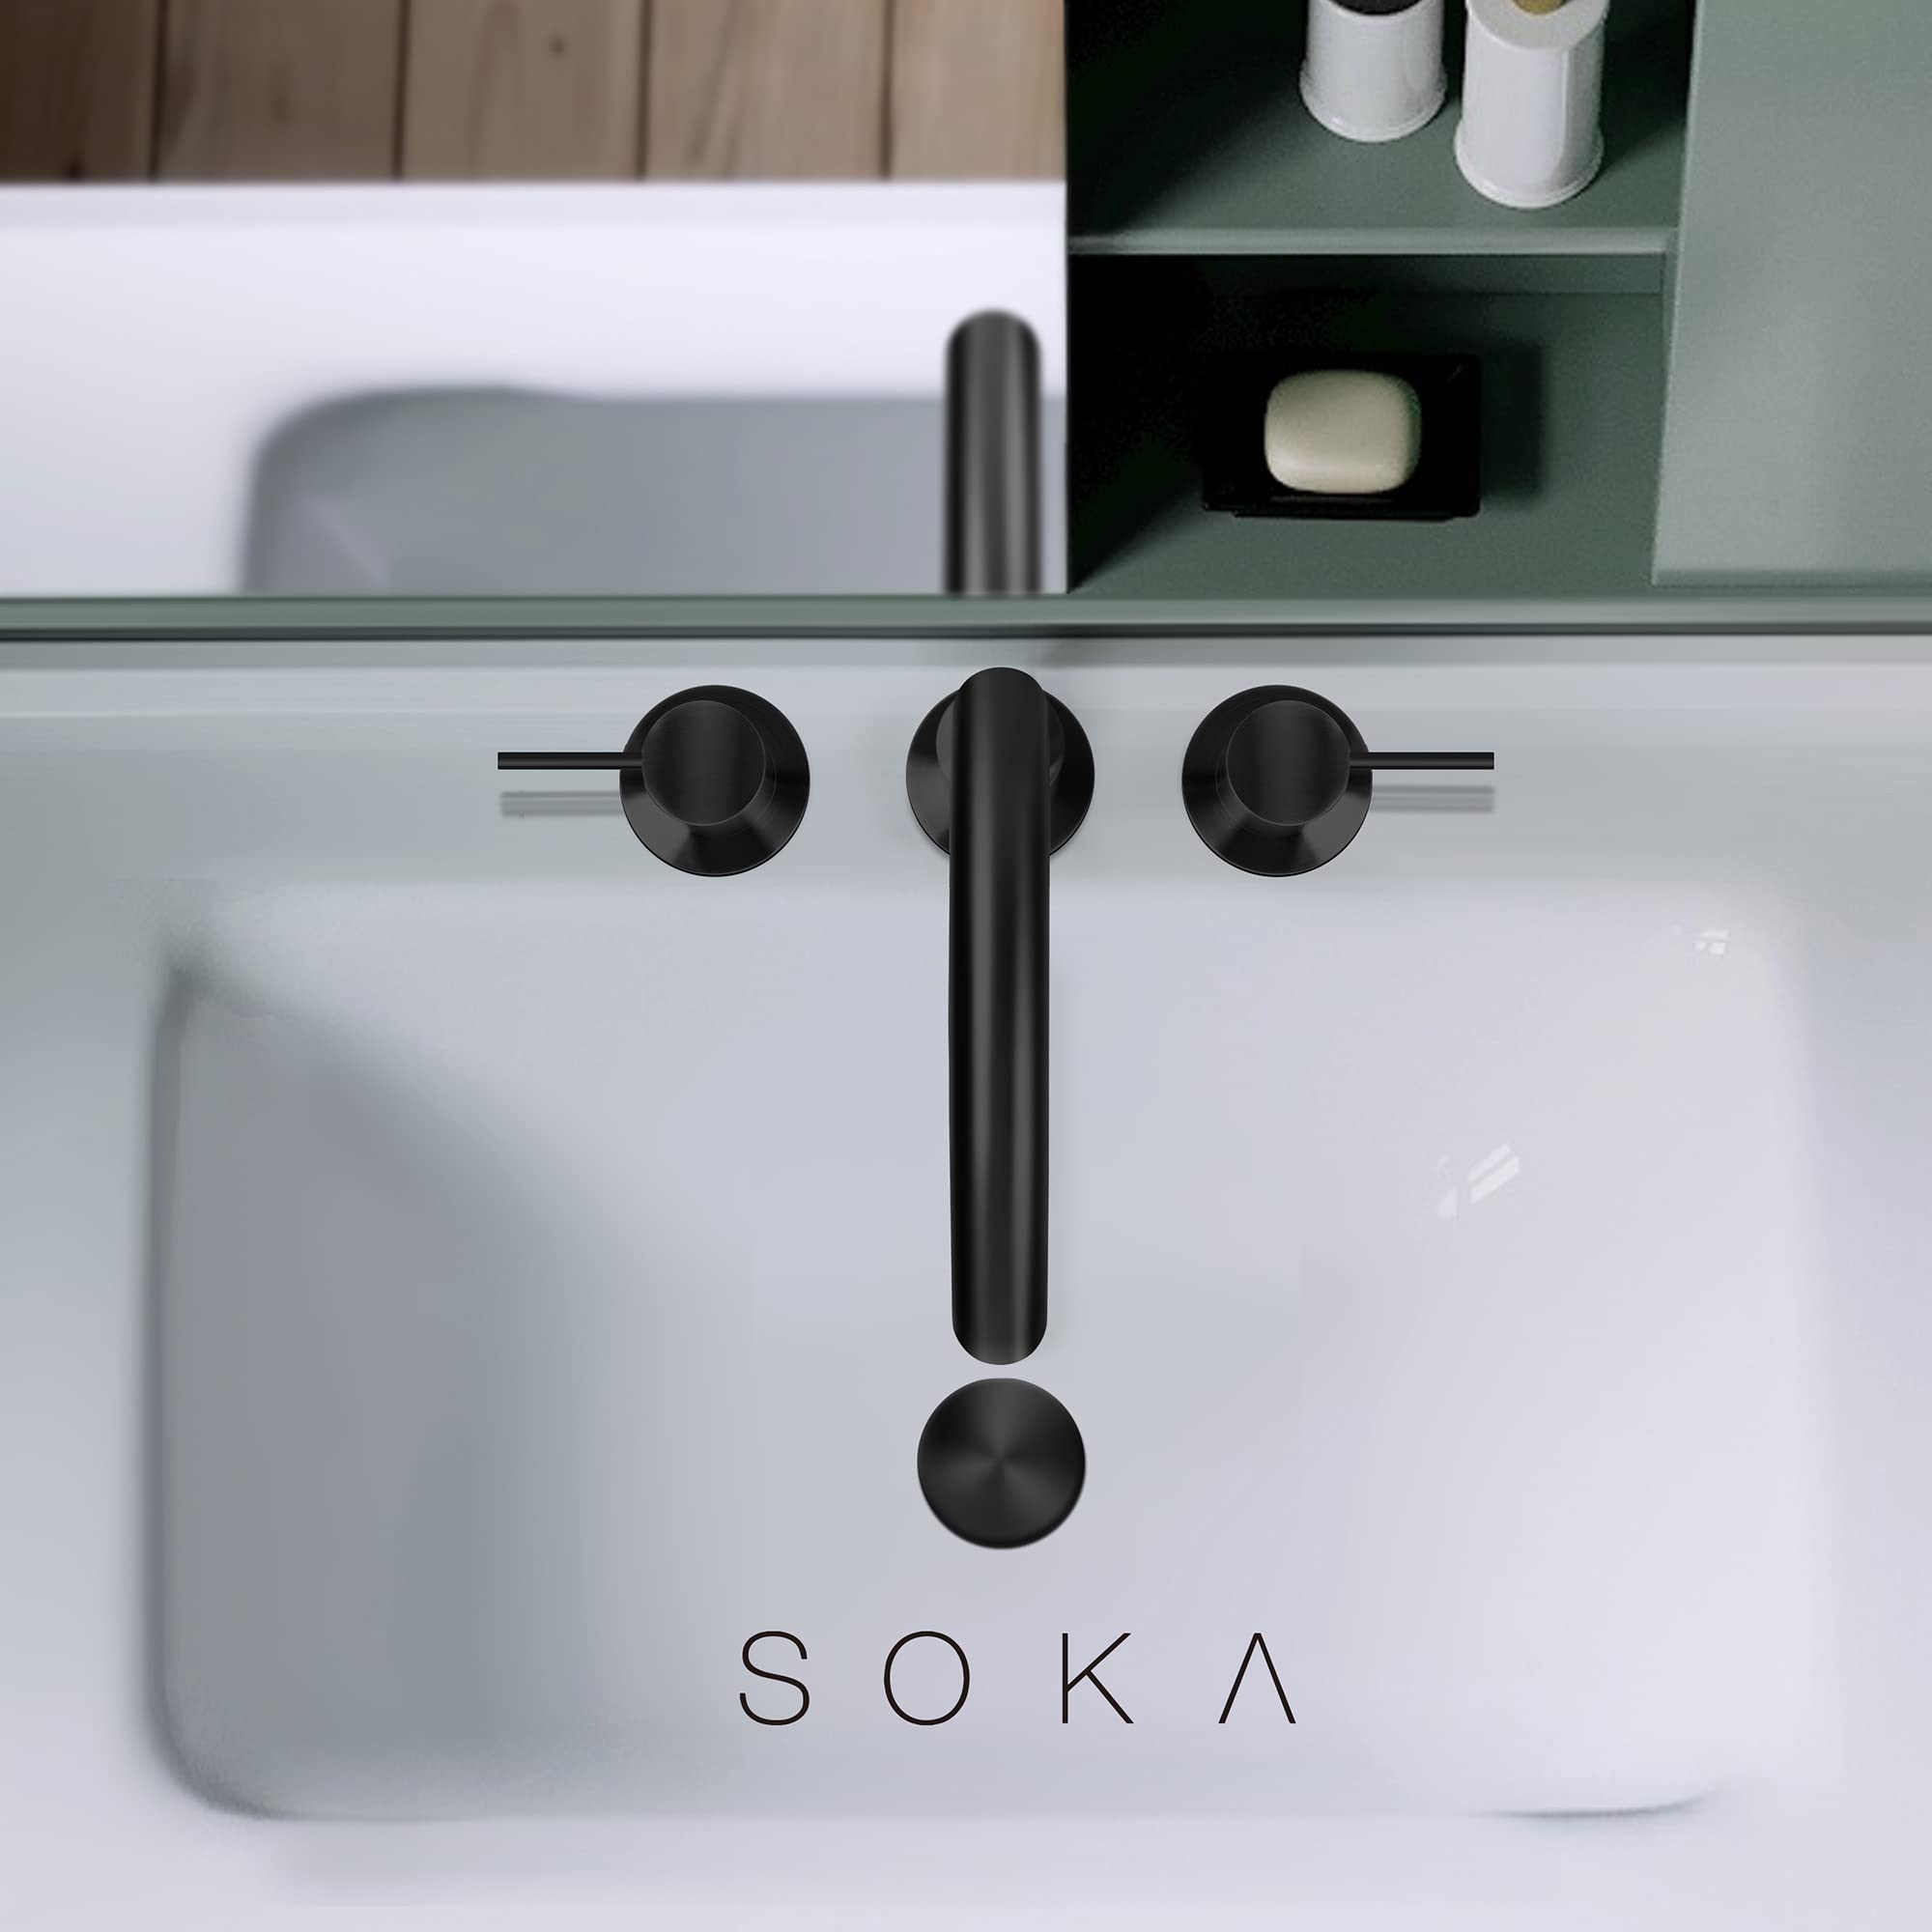 SOKA 8-16 Inch Widespread Bathroom Faucet 2 Handles Matte Black Commercial Sink Touch 3 Pieces Vanity Lavatory 360 Degree Rotating Faucet Pop Up Drain Assembly, Matte Black - L, 8 INCH L - Head